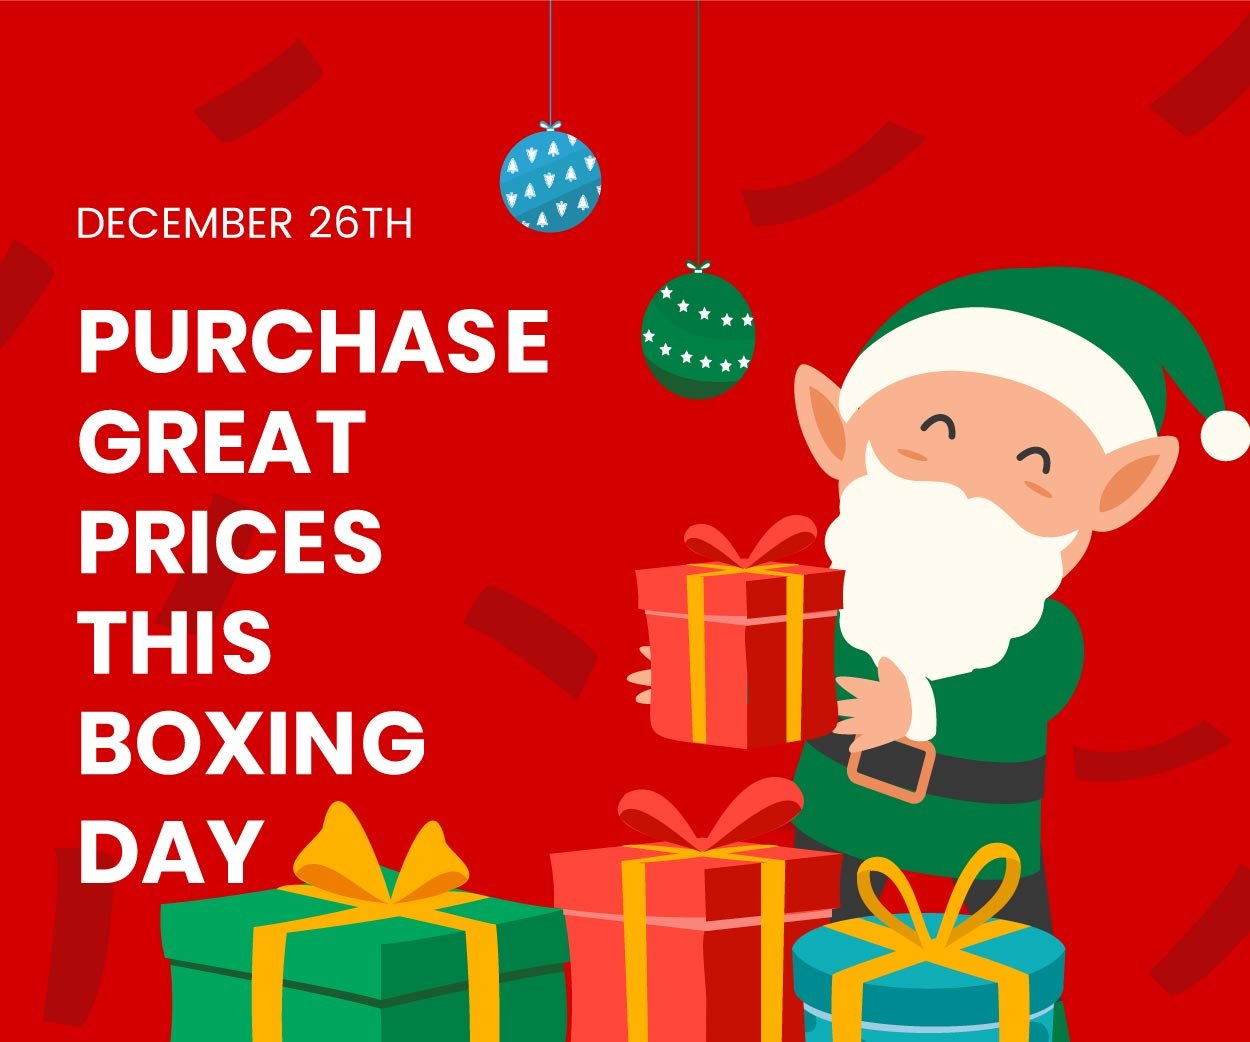 Boxing Day Photo Banner in Illustrator, PSD, EPS, SVG, PNG, JPEG